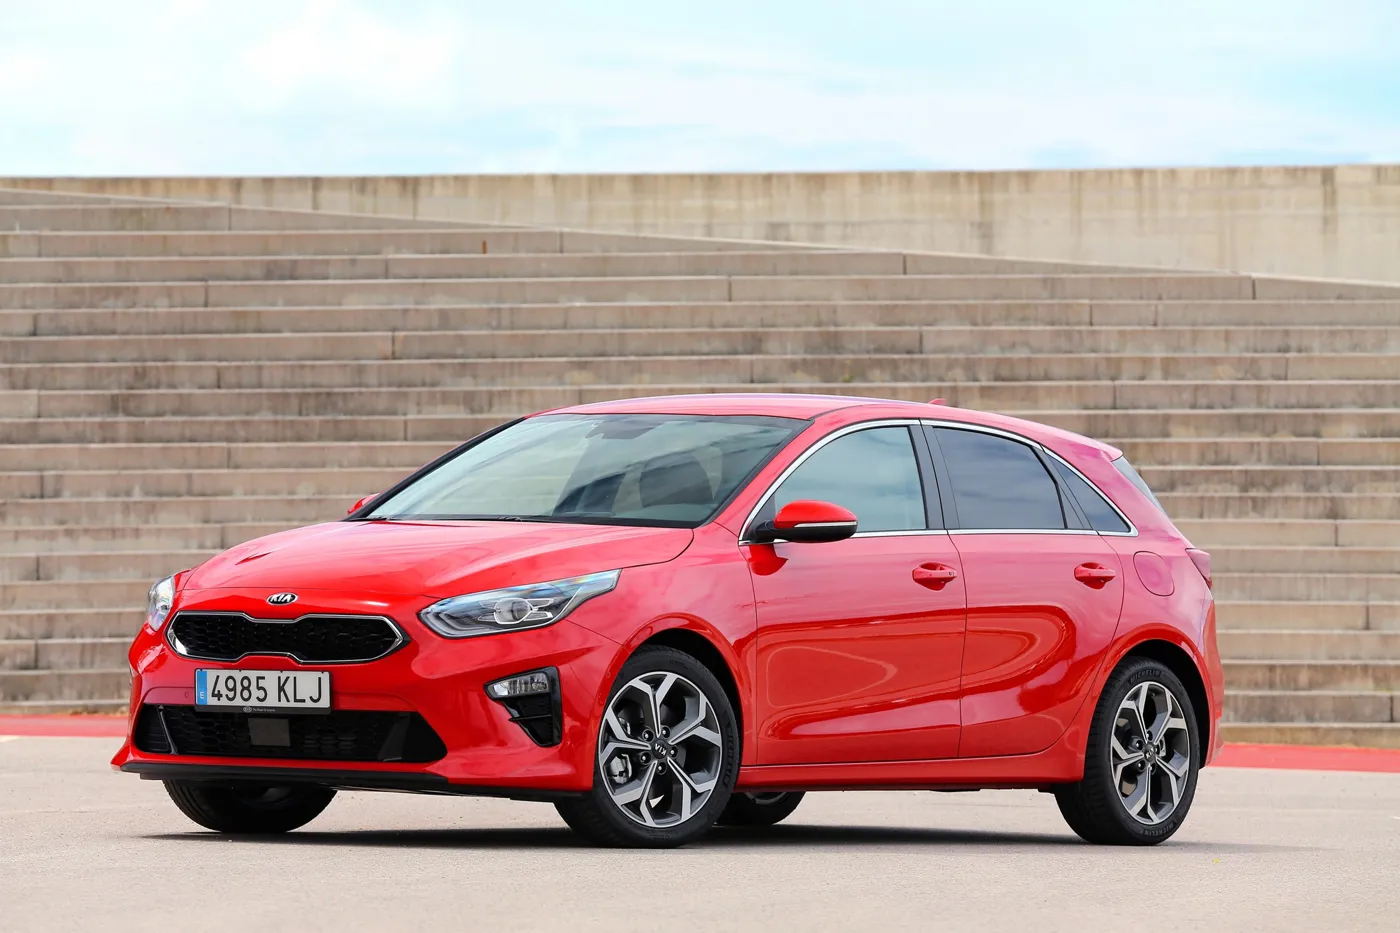 New Kia Ceed road test review